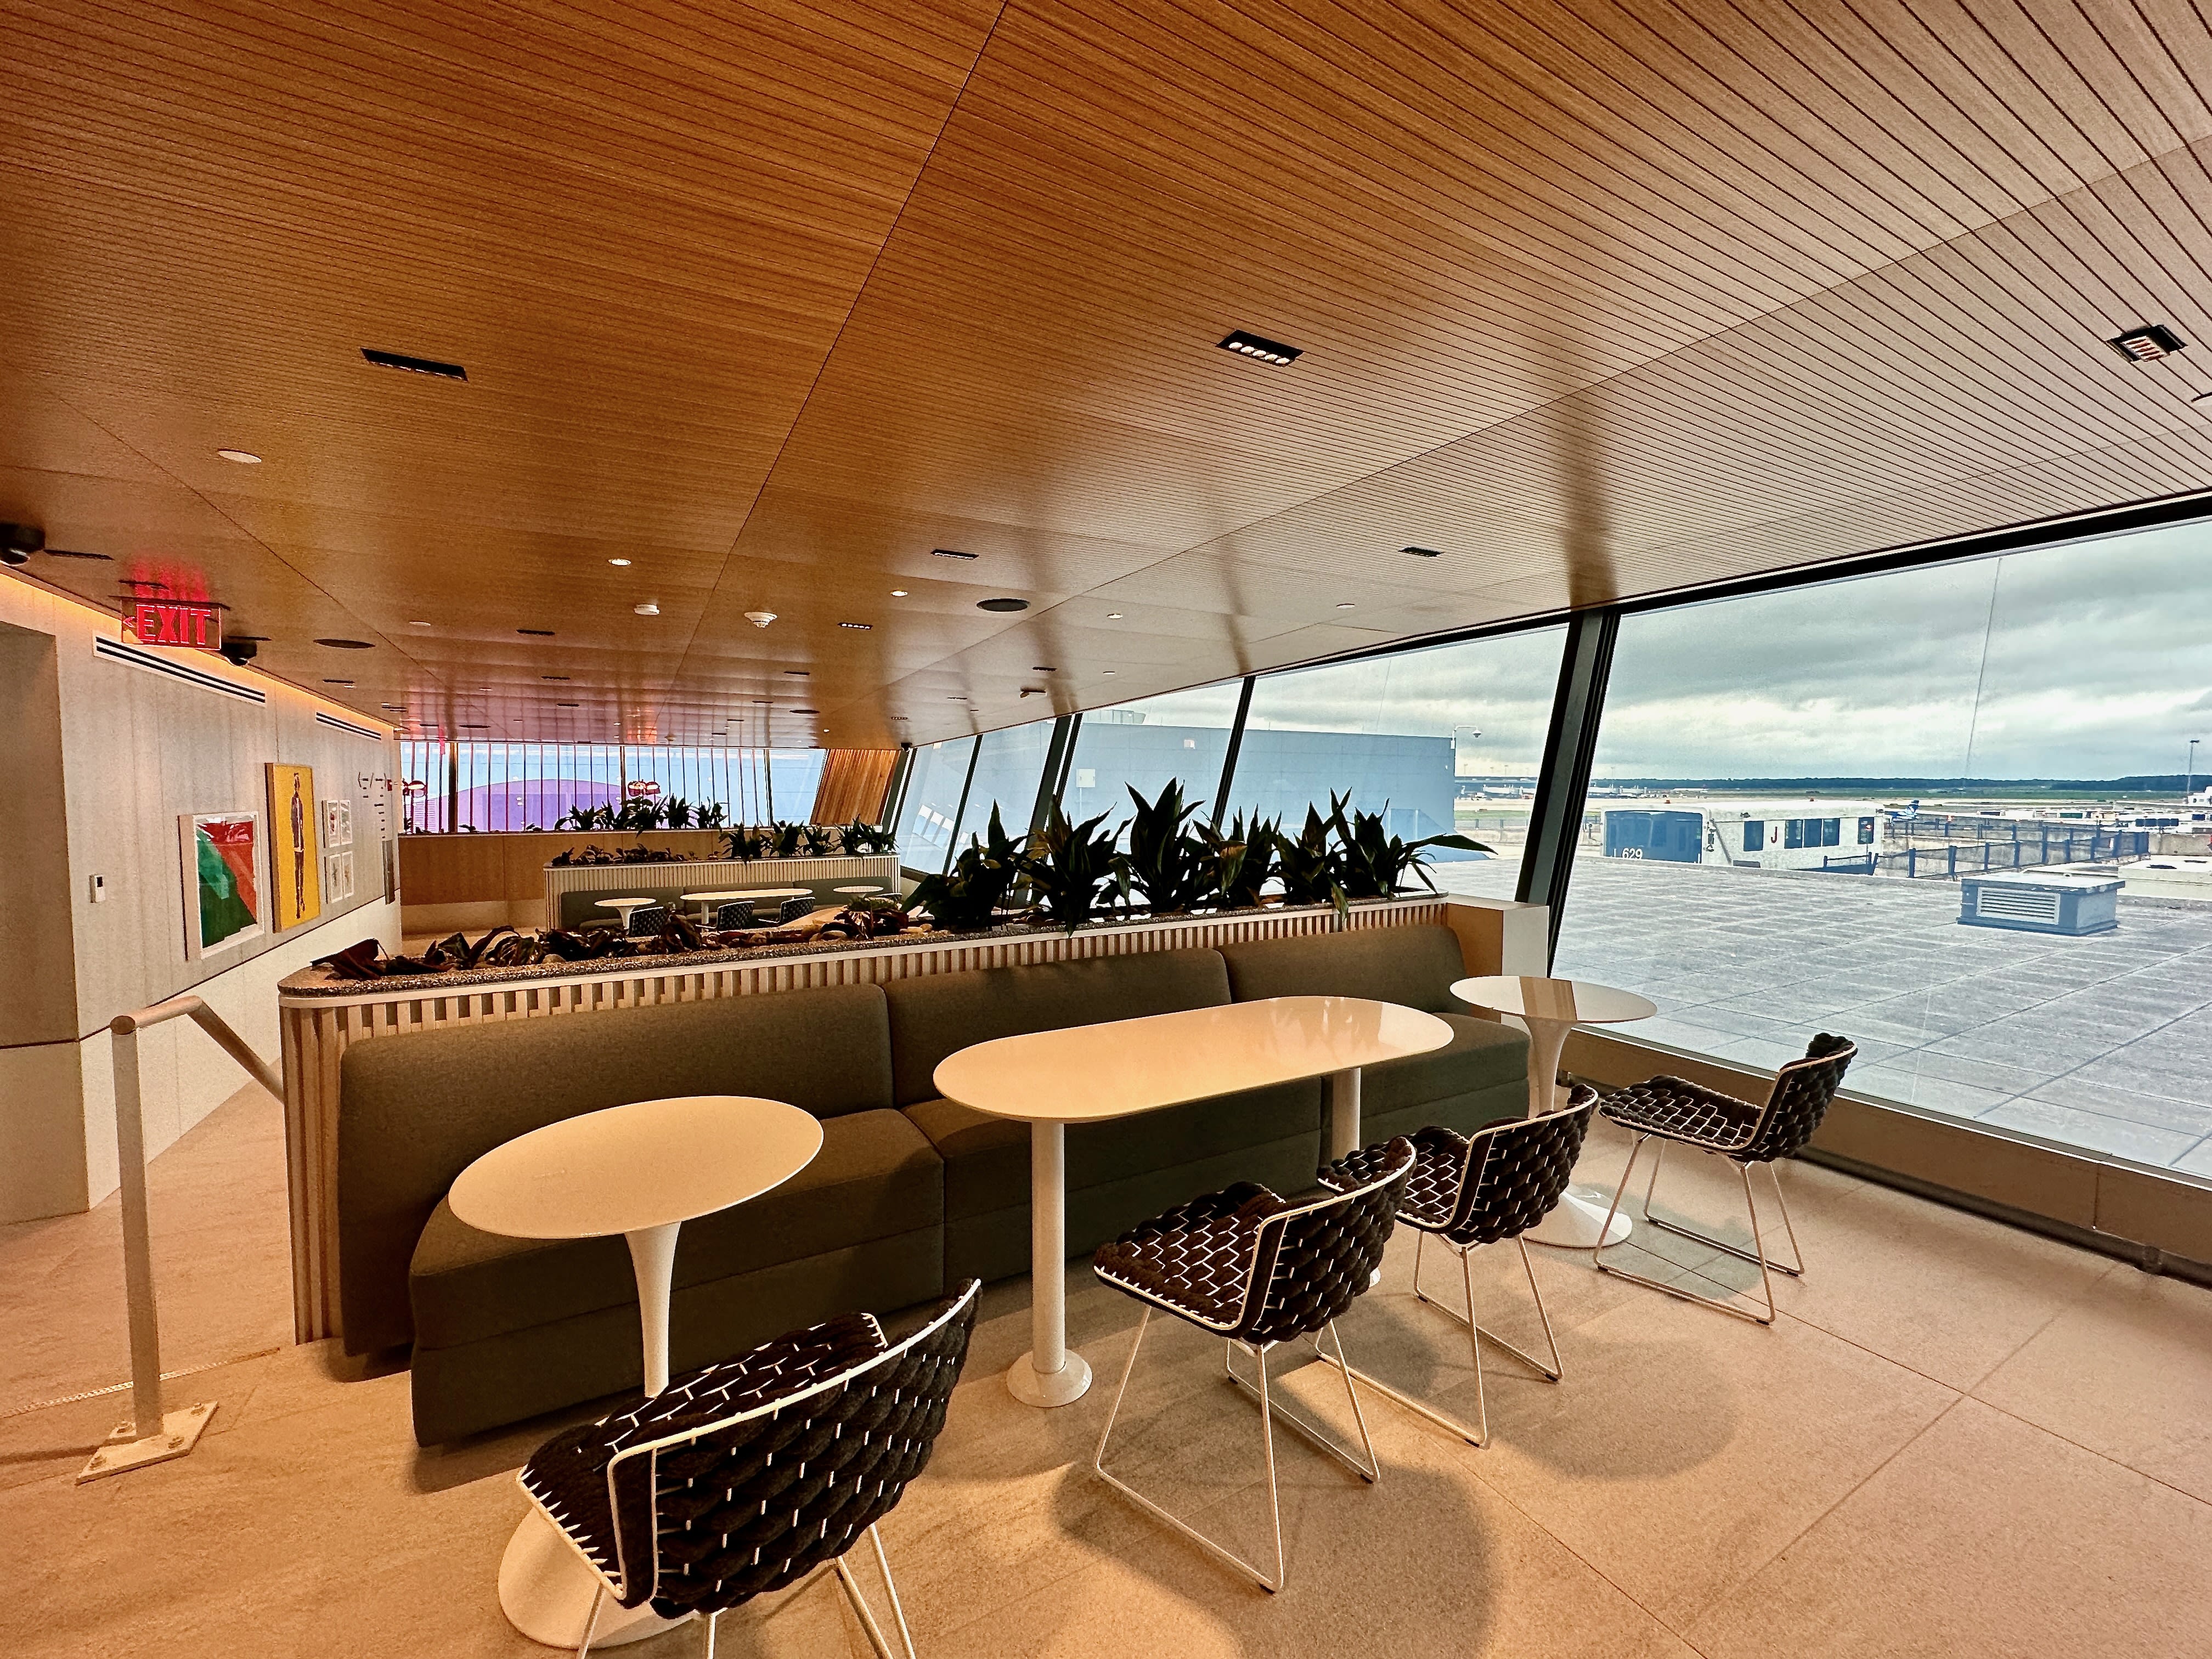 First look at Capital One airport lounge opening in Washing Dulles